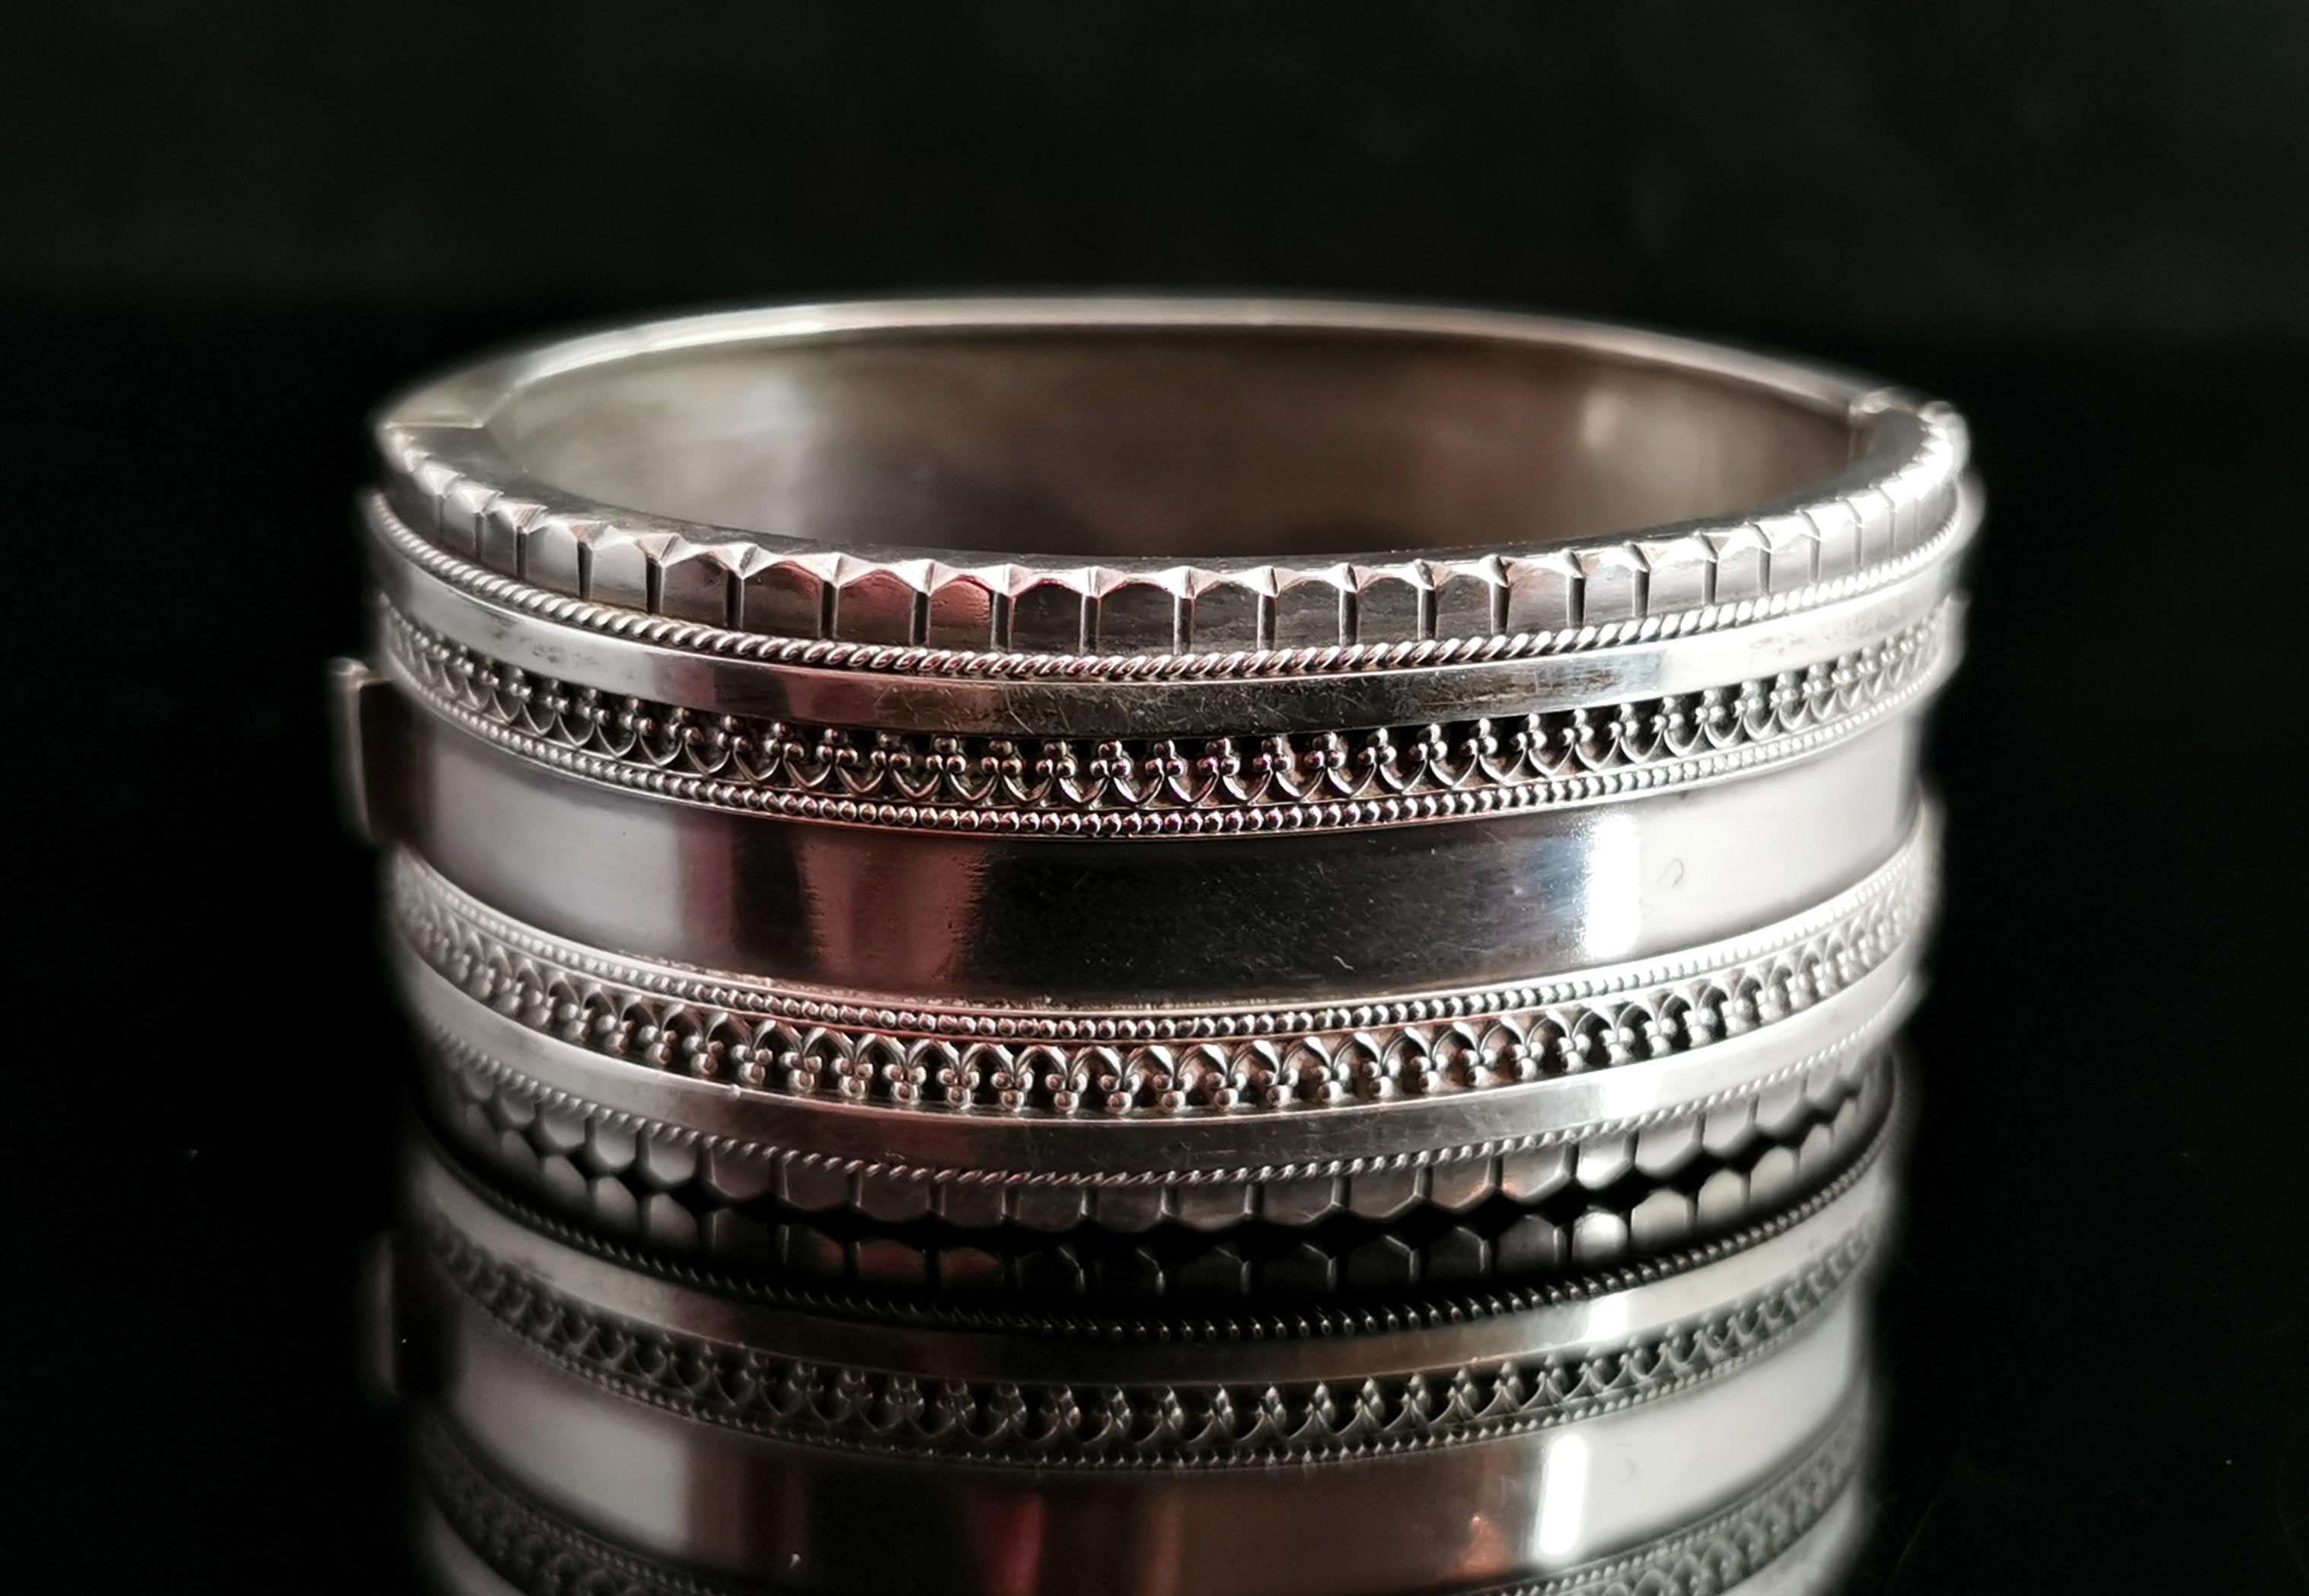 A beautiful antique Victorian era sterling silver bangle.

A wide bangle, almost an inch wide with a day to night design, one side finished in a plain polished silver and the other side with gorgeous applied scrolling arches and beading.

The edge